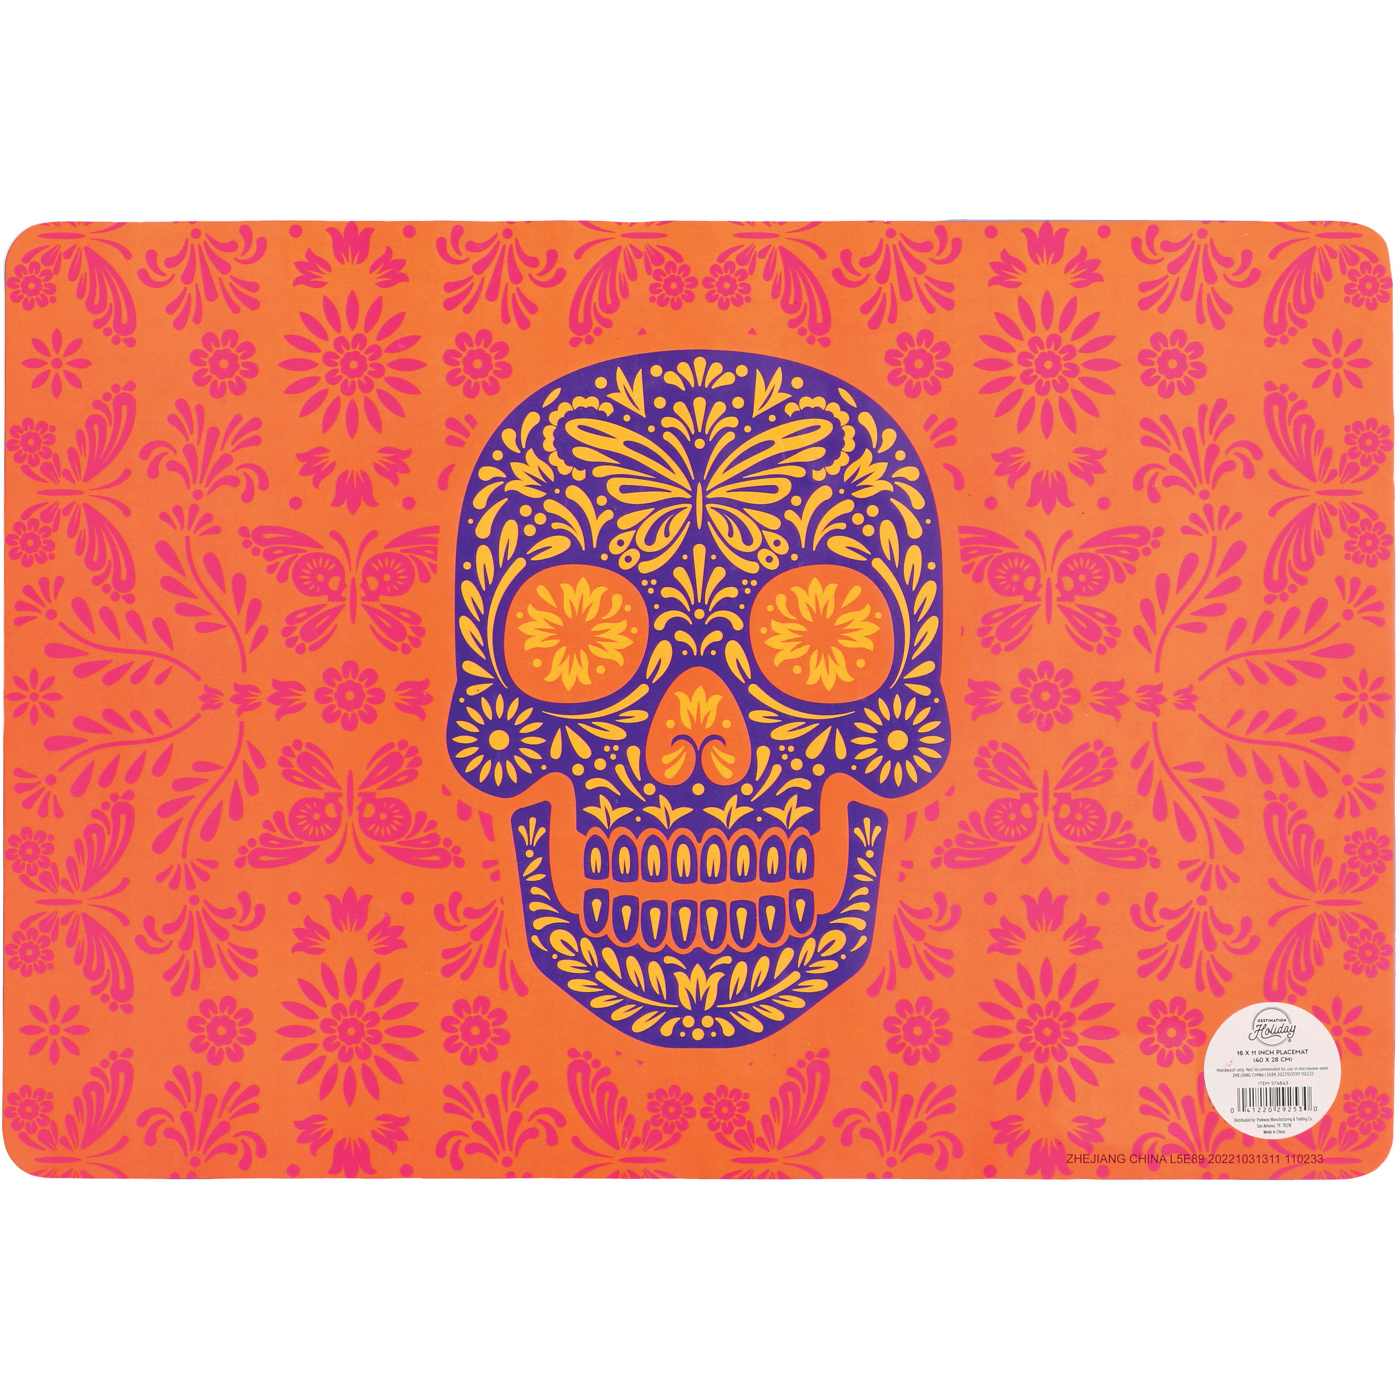 Destination Holiday Day of the Dead Calavera Dual Sided Placemat; image 2 of 2